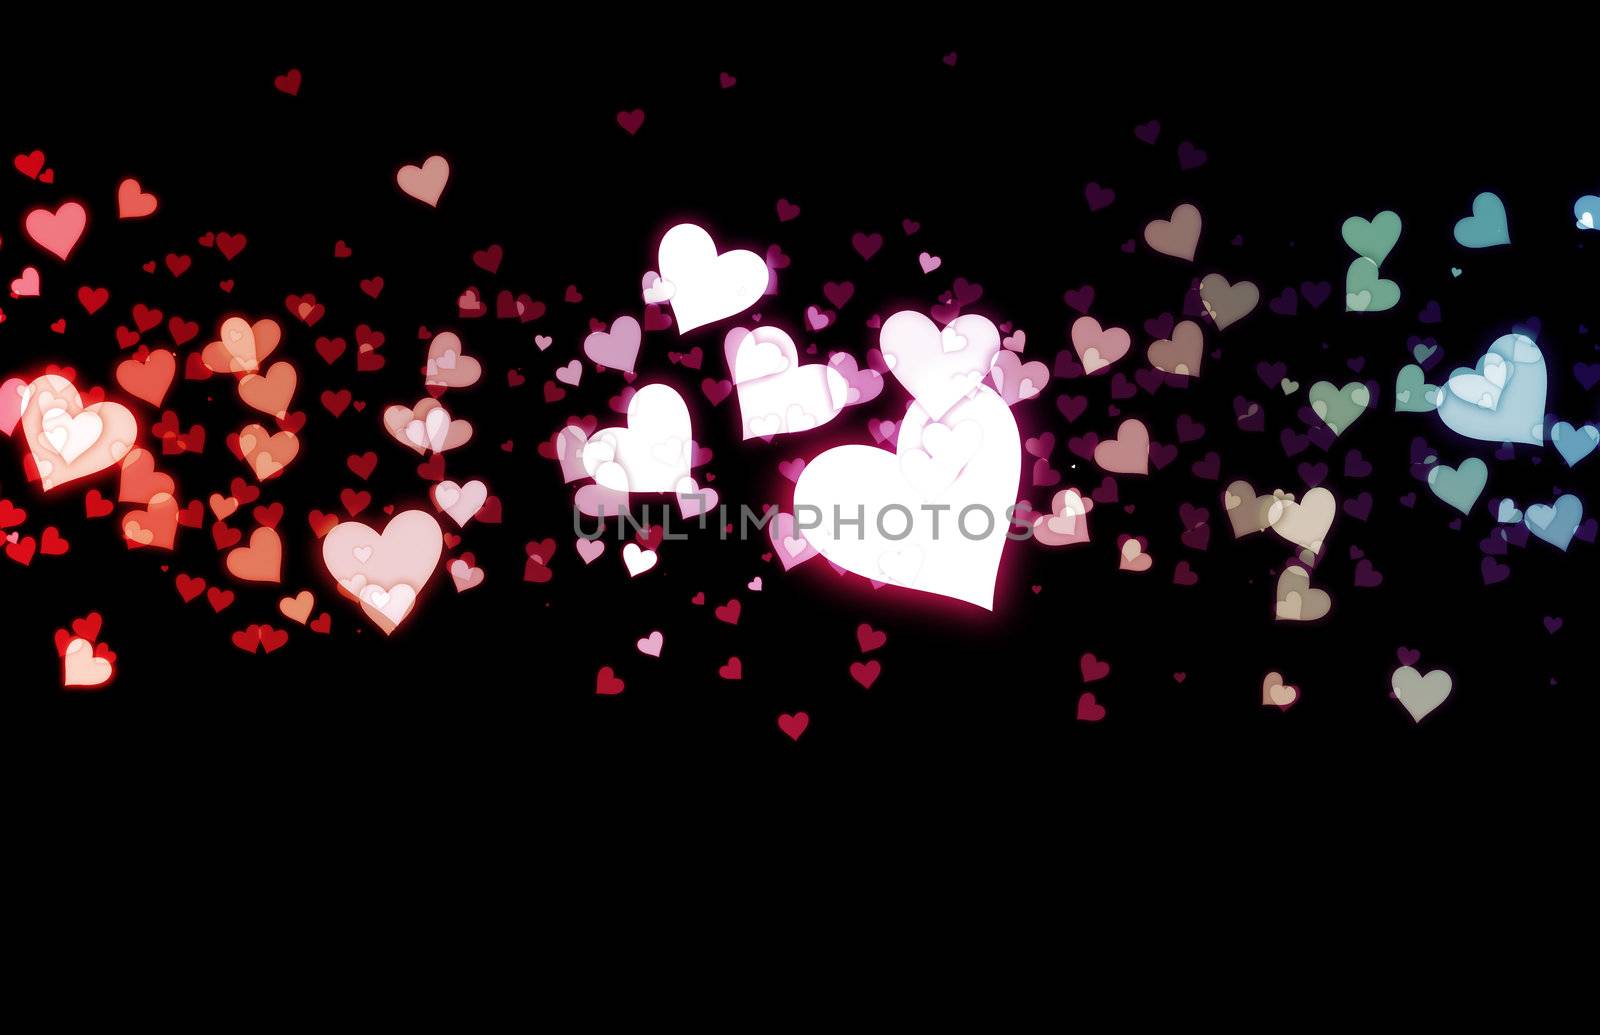 Romance Background with Floating Hearts as Art